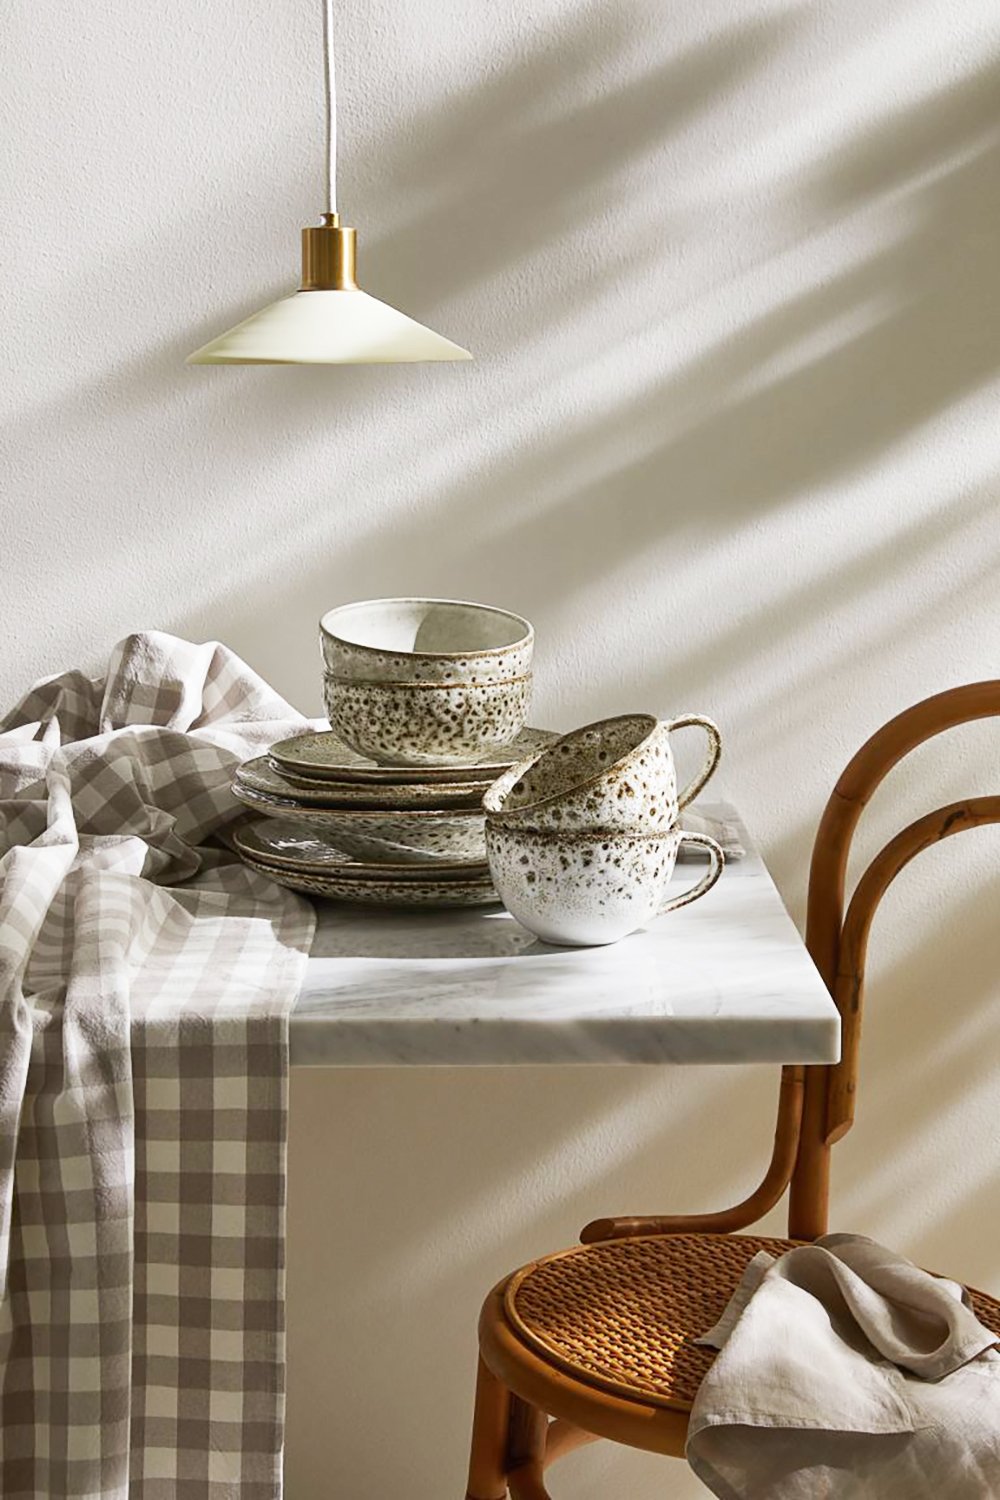 My Seasonal Favorites from H&M Home - roomfortuesday.com